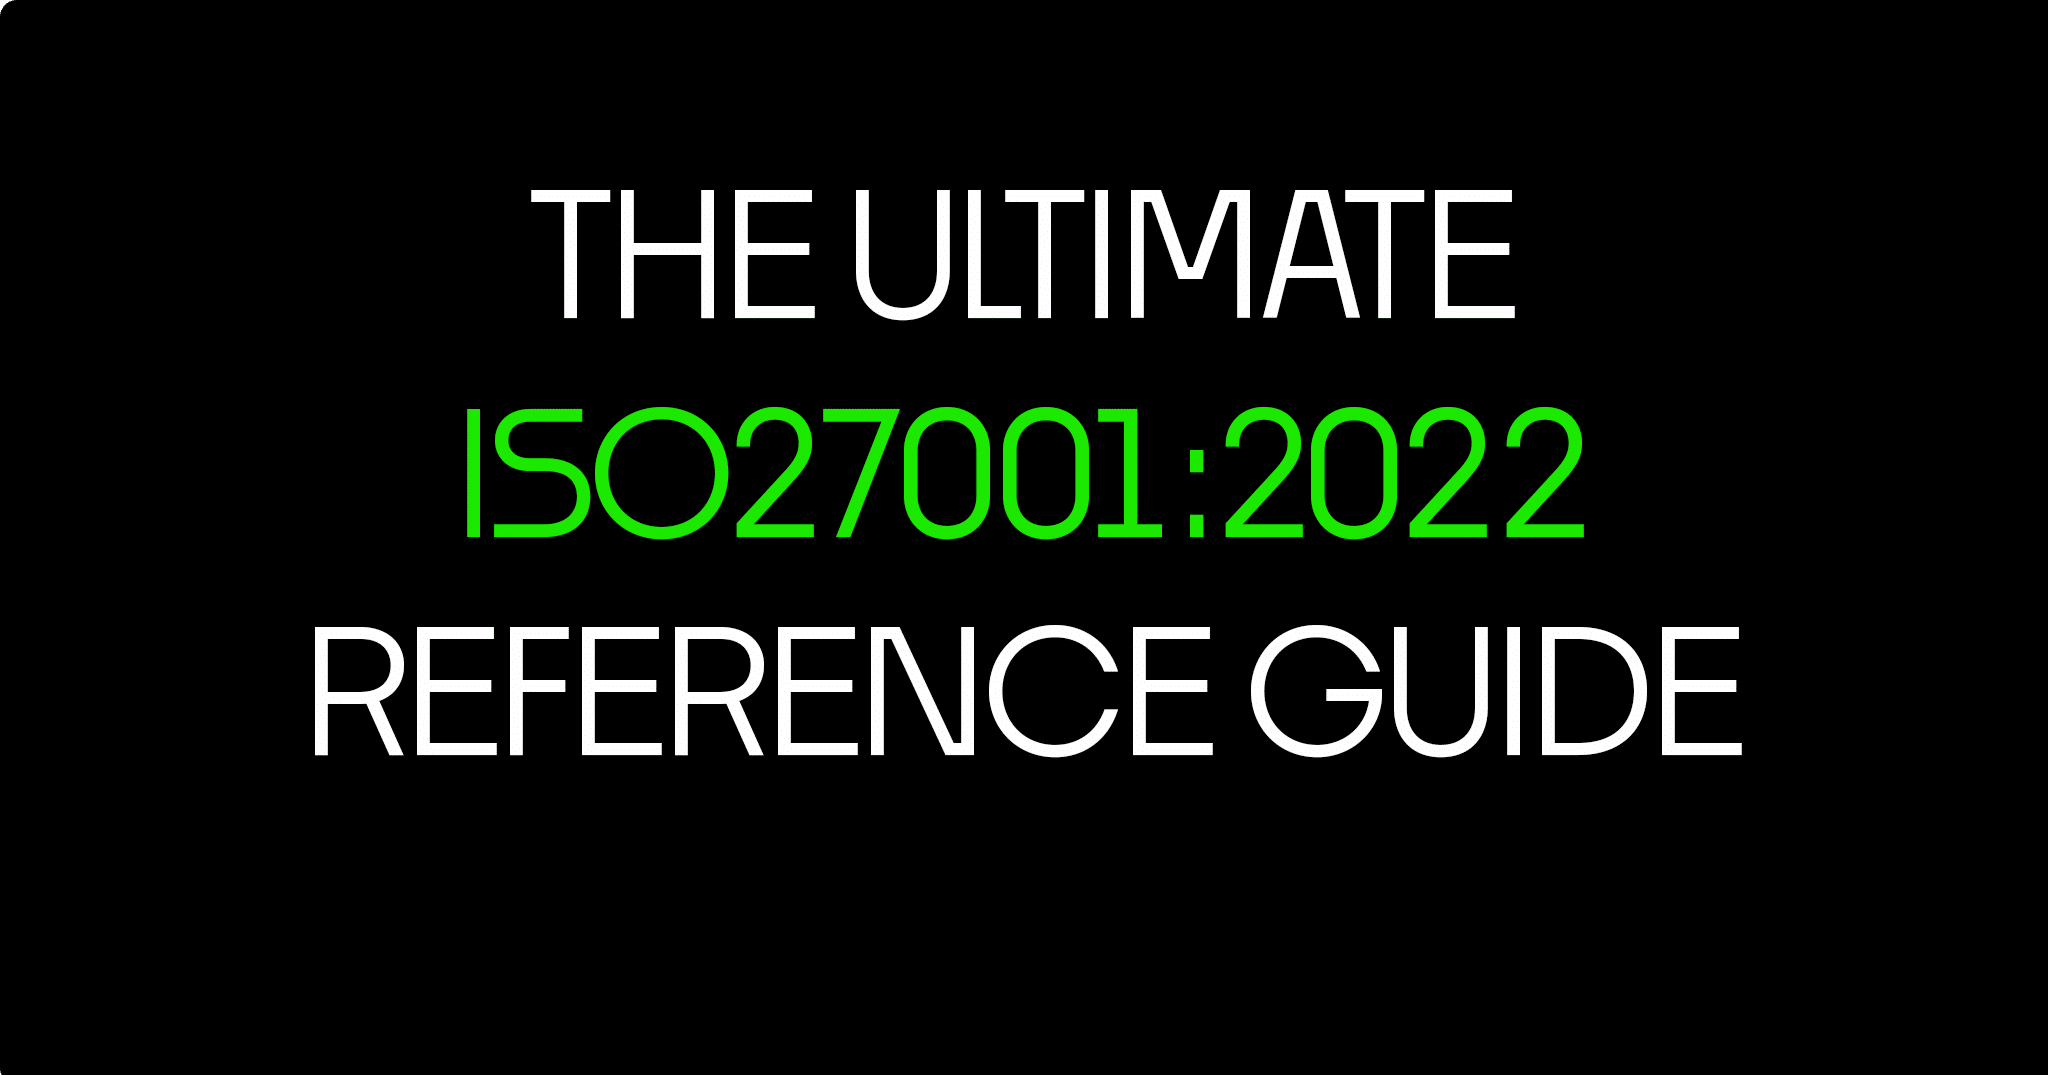 The ultimate ISO 27001:20022 Reference Guide